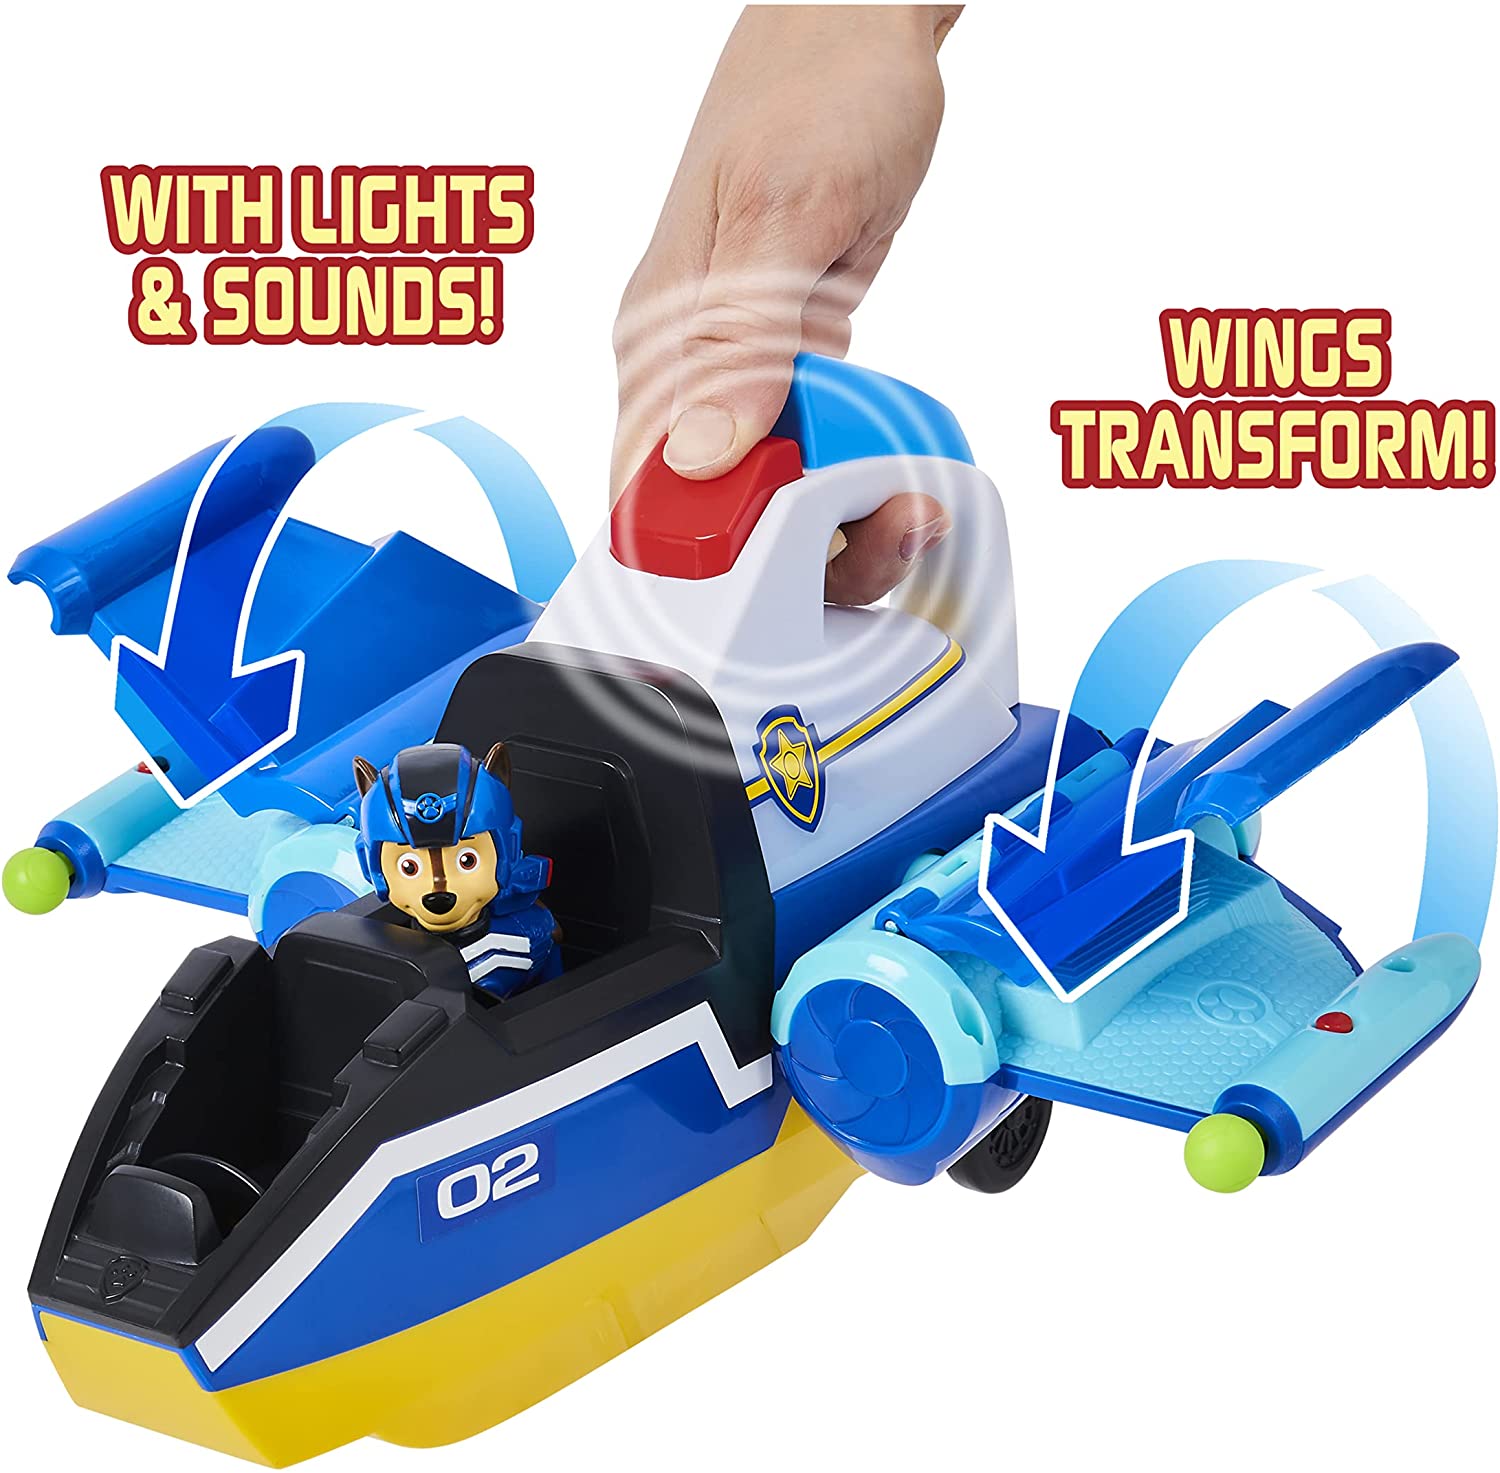 Paw Patrol Jet to The Rescue Deluxe Transforming Spiral Rescue Jet w/ Lights & Sounds $11.90 + Free Shipping w/ Amazon Prime or Orders $25+